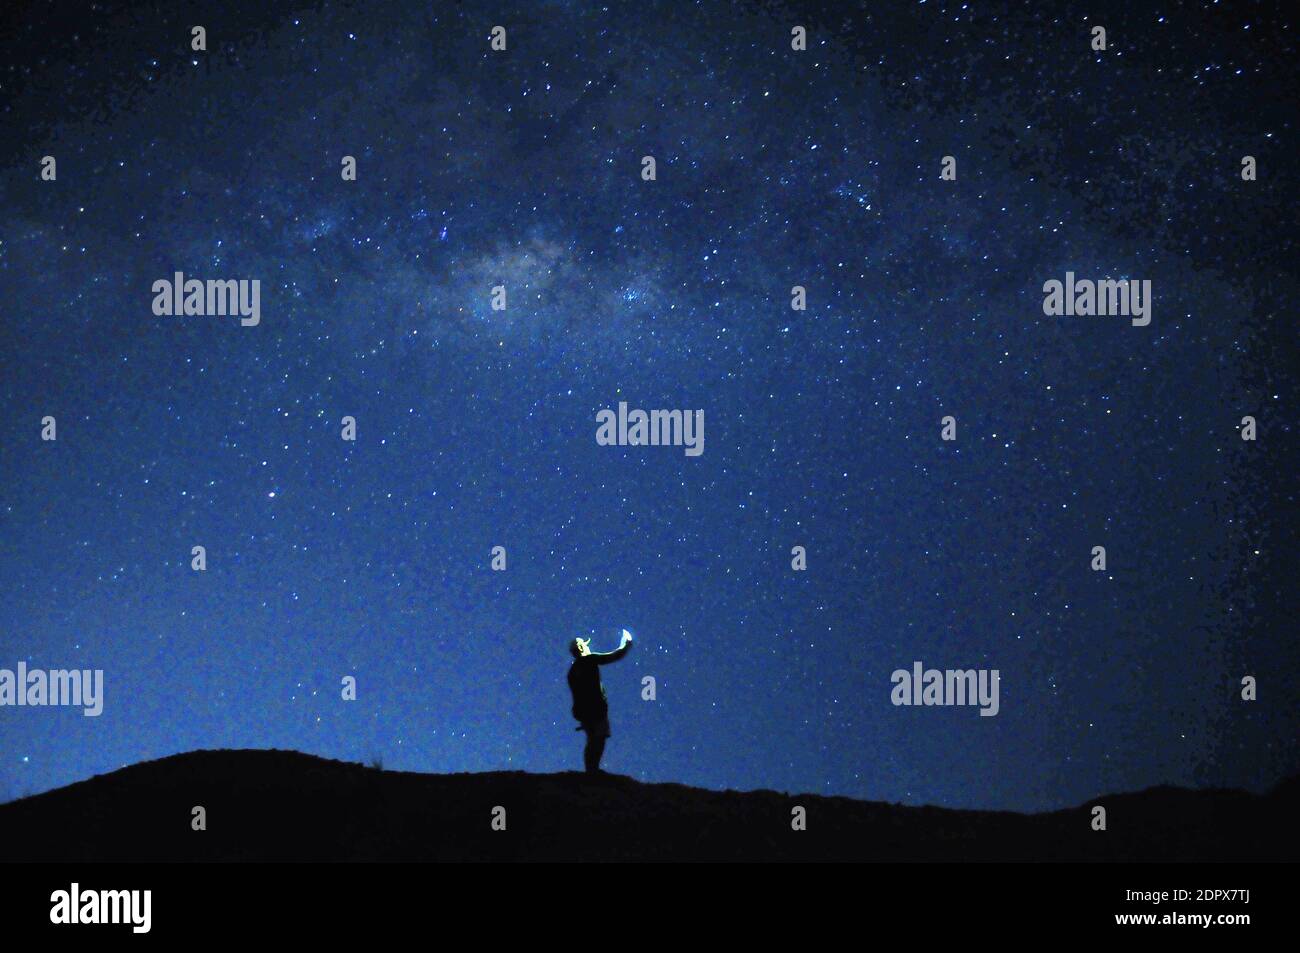 Silhouette Man Standing On Land Against Sky At Night Stock Photo